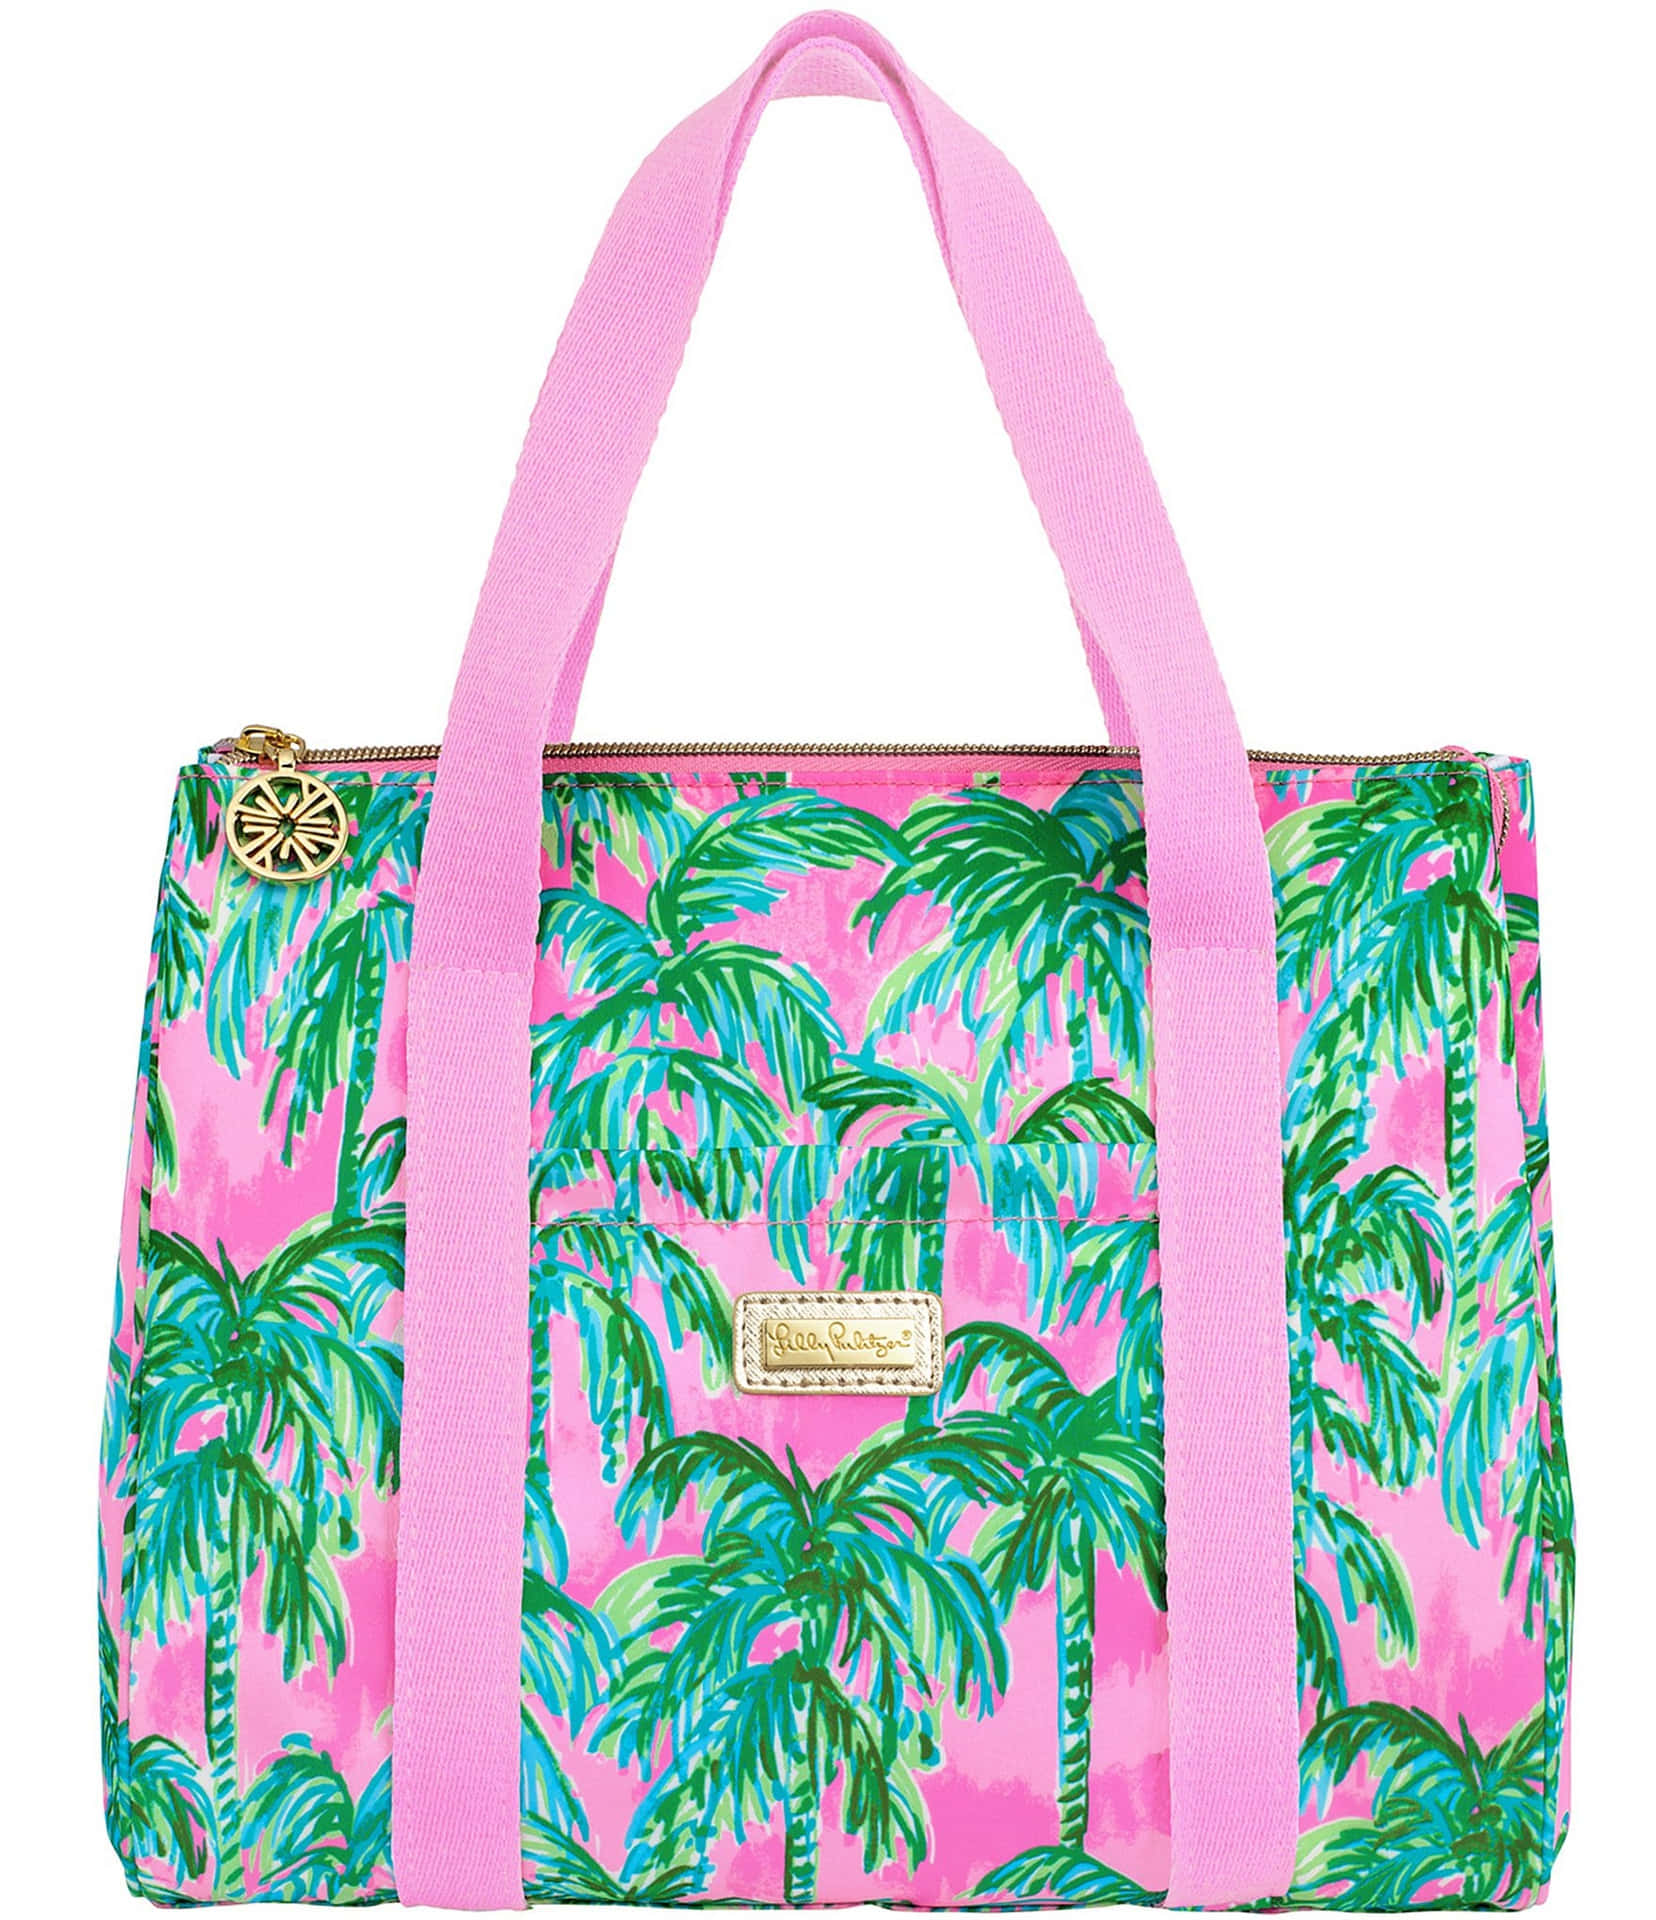 Download Lilly Pulitzer Palm Print Tote Bag | Wallpapers.com